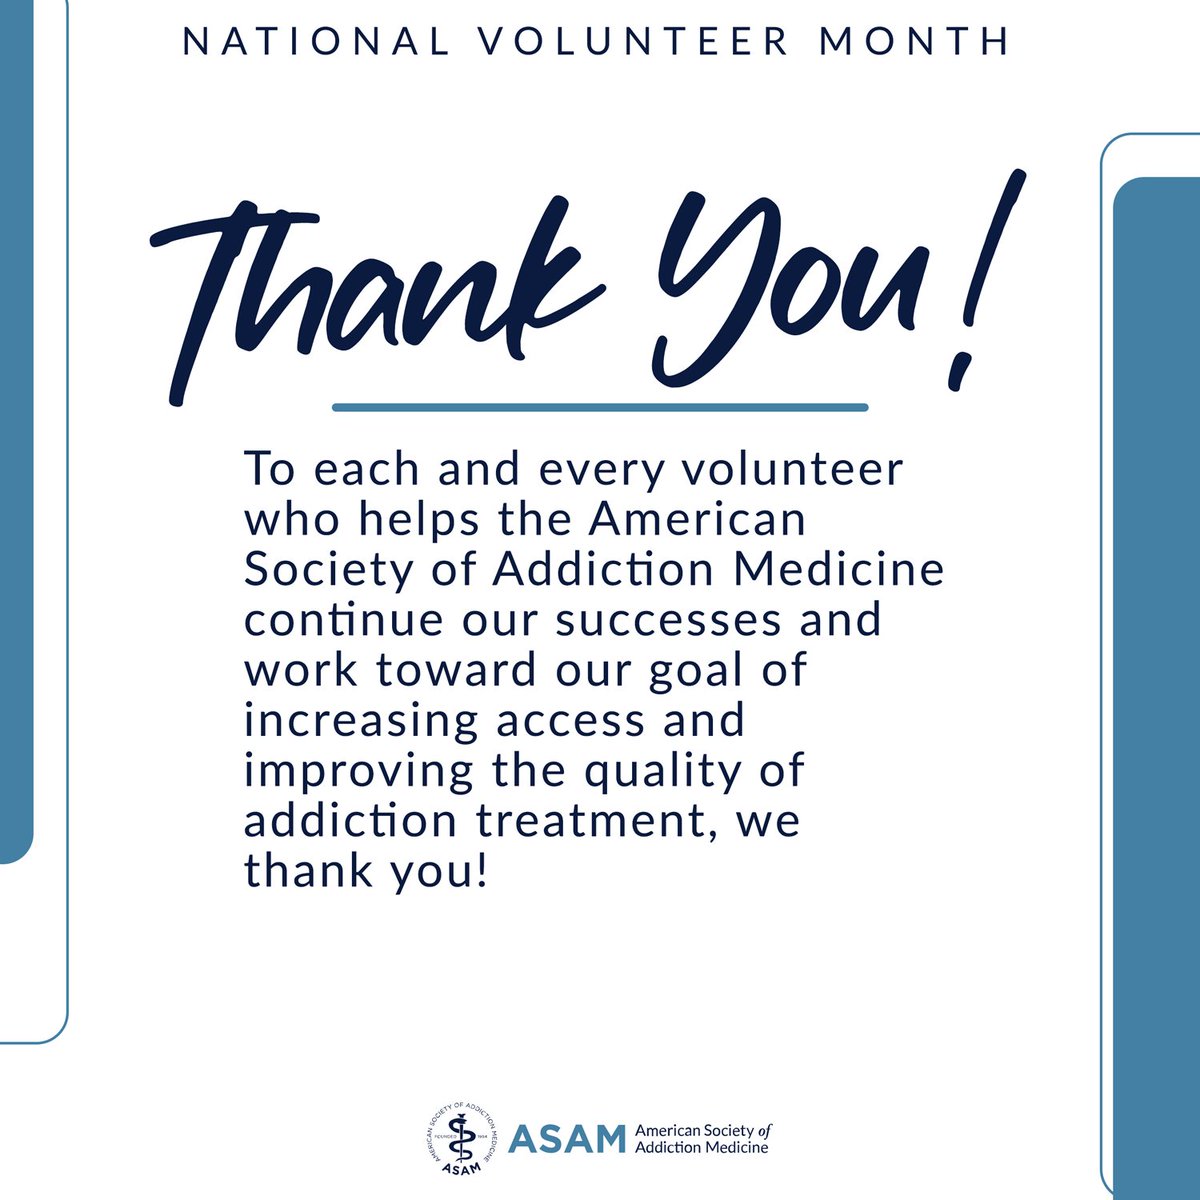 Happy #NationalVolunteerMonth to all of our incredible volunteers in our ASAM community! We appreciate you! #Volunteer #ThankYou #ASAM #AddictionMedicine #AddictionTreatment